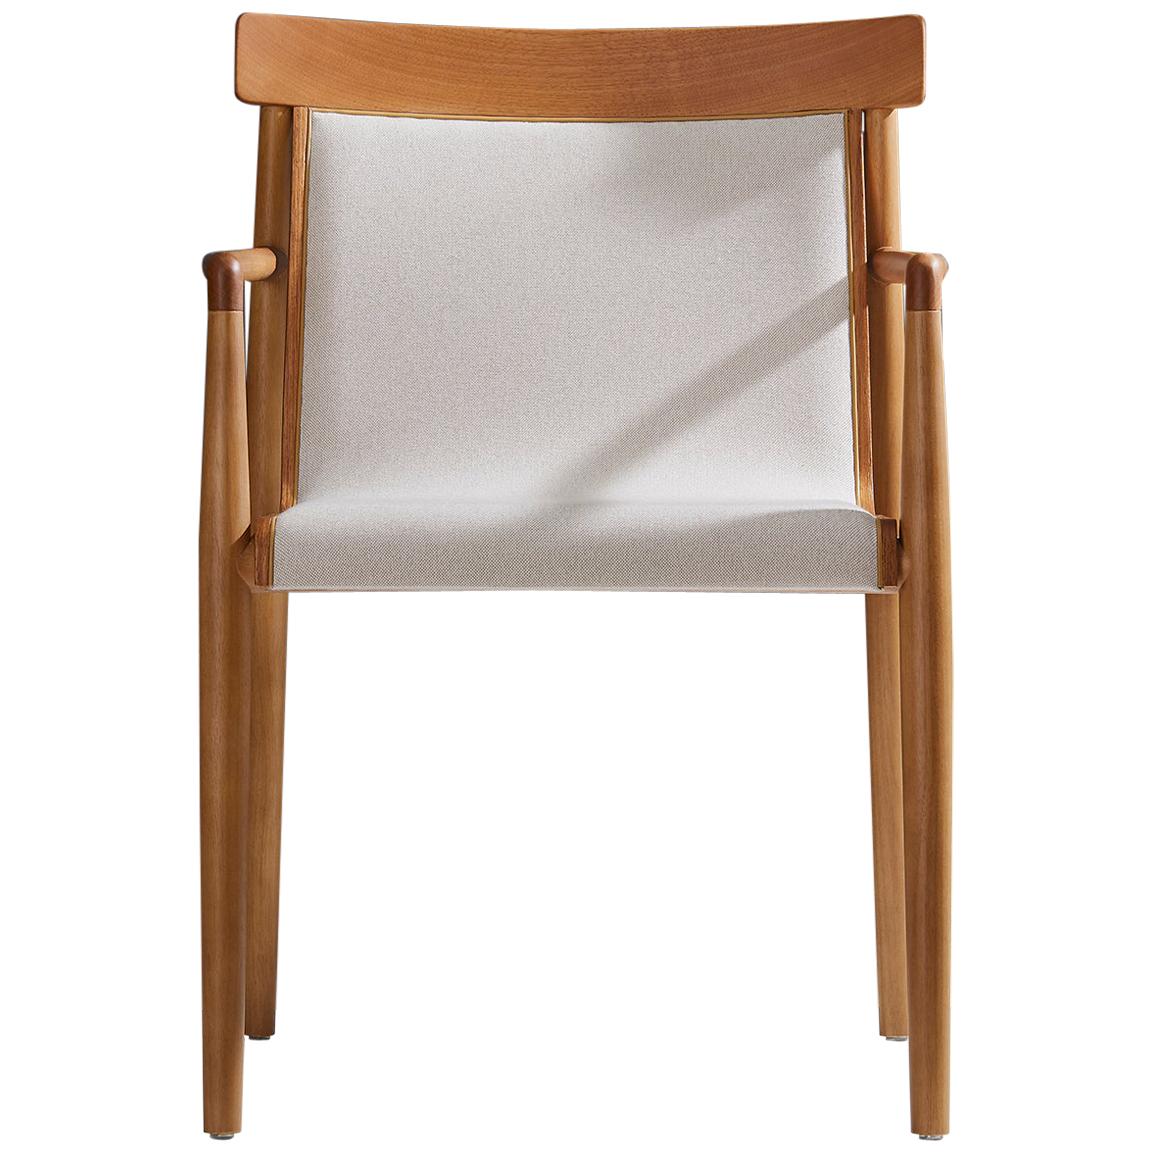 Contemporary Chair in Natural Solid Wood, Upholstered, Natural Wood Back, Arms